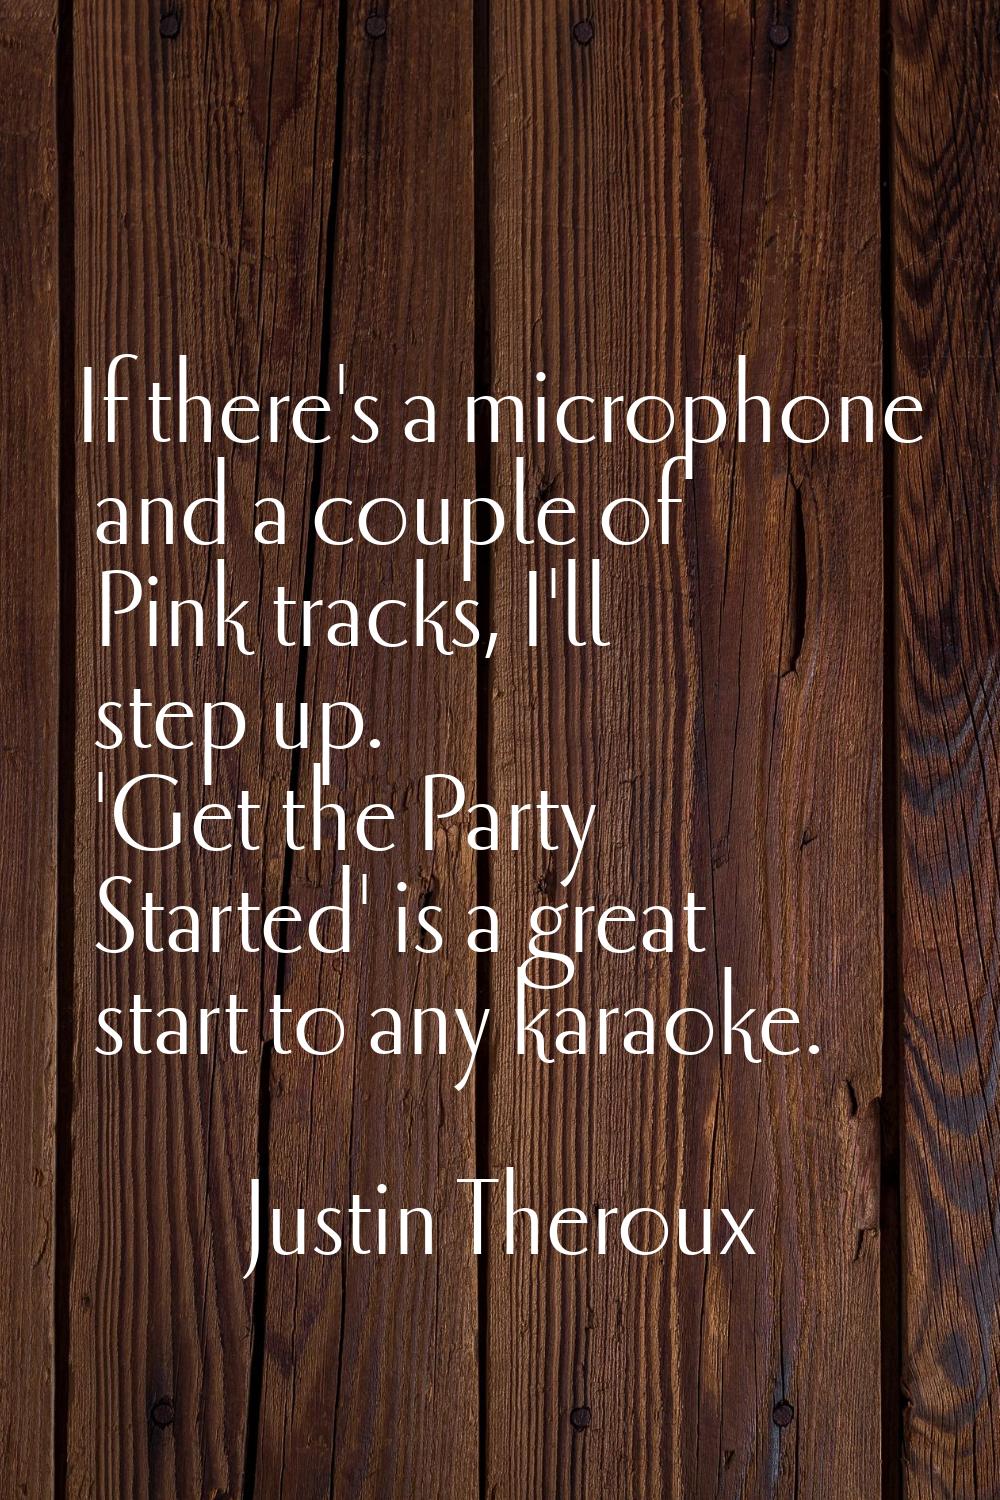 If there's a microphone and a couple of Pink tracks, I'll step up. 'Get the Party Started' is a gre